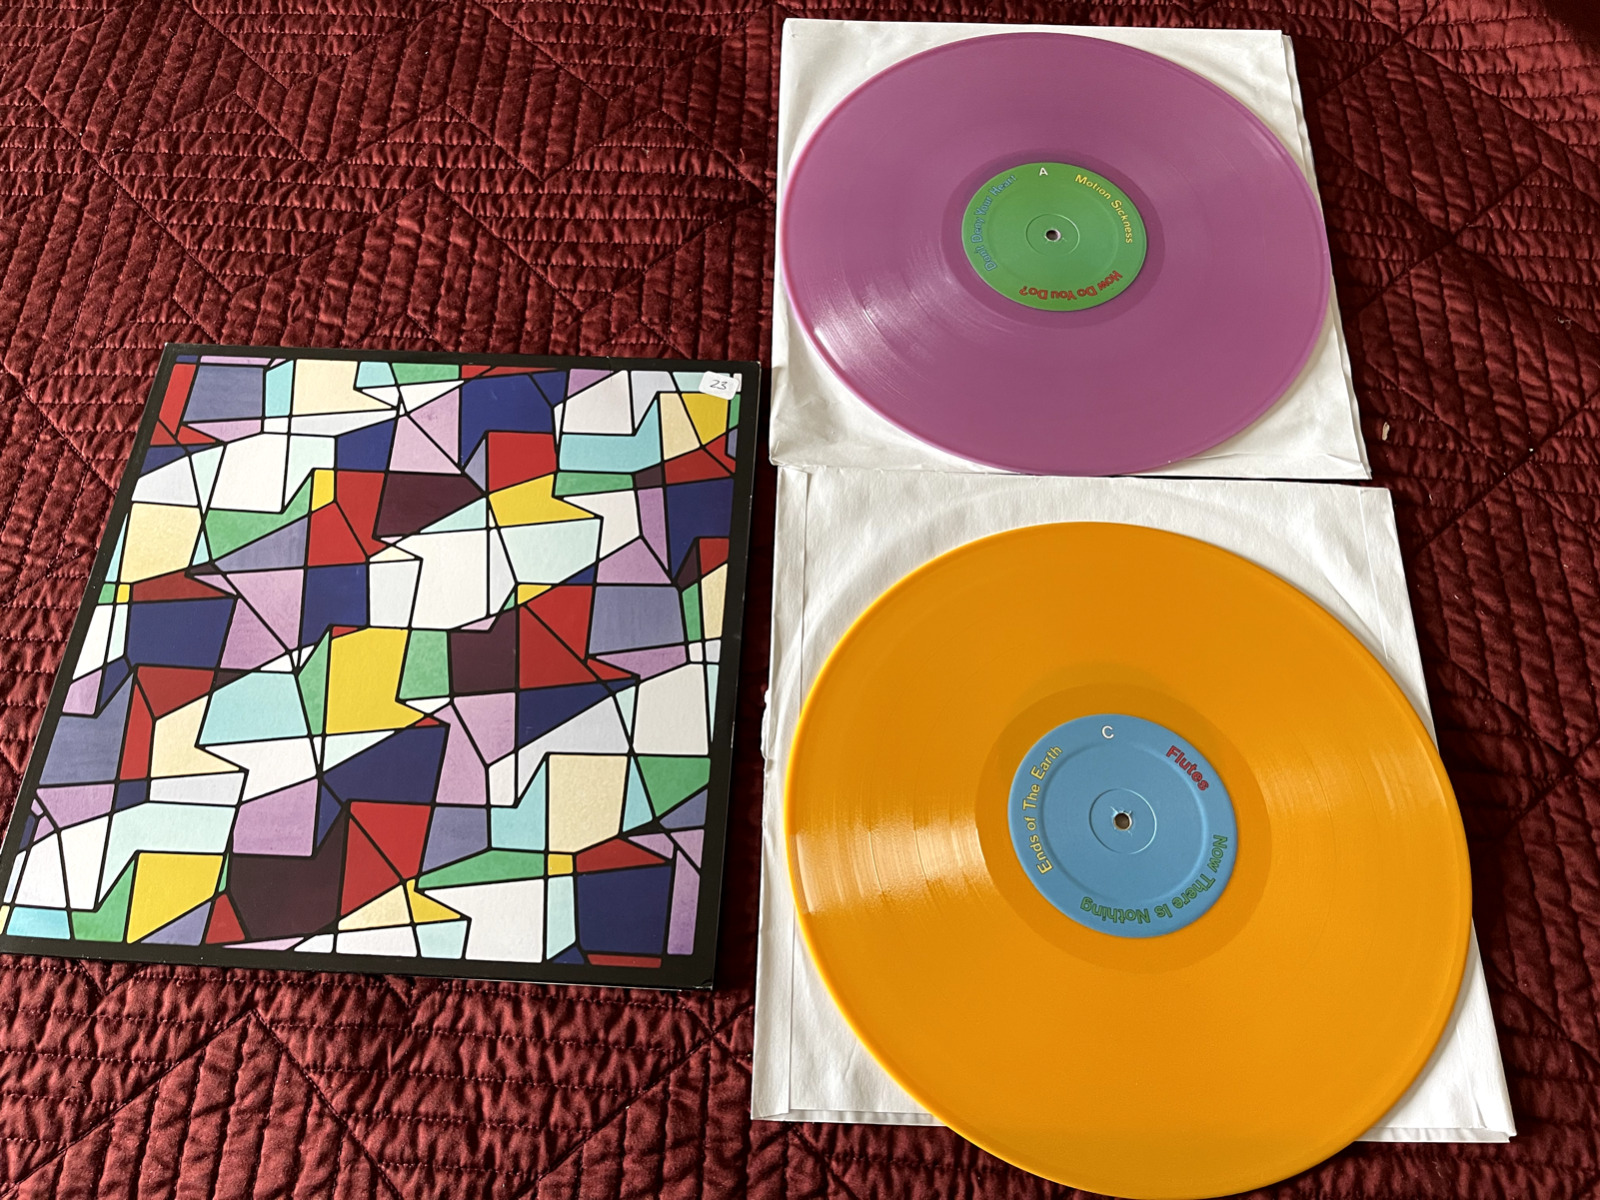 Hot Chip - In Our Heads yellow/Lavender colored 2x 12"  VINYL LP Domino – DNO328